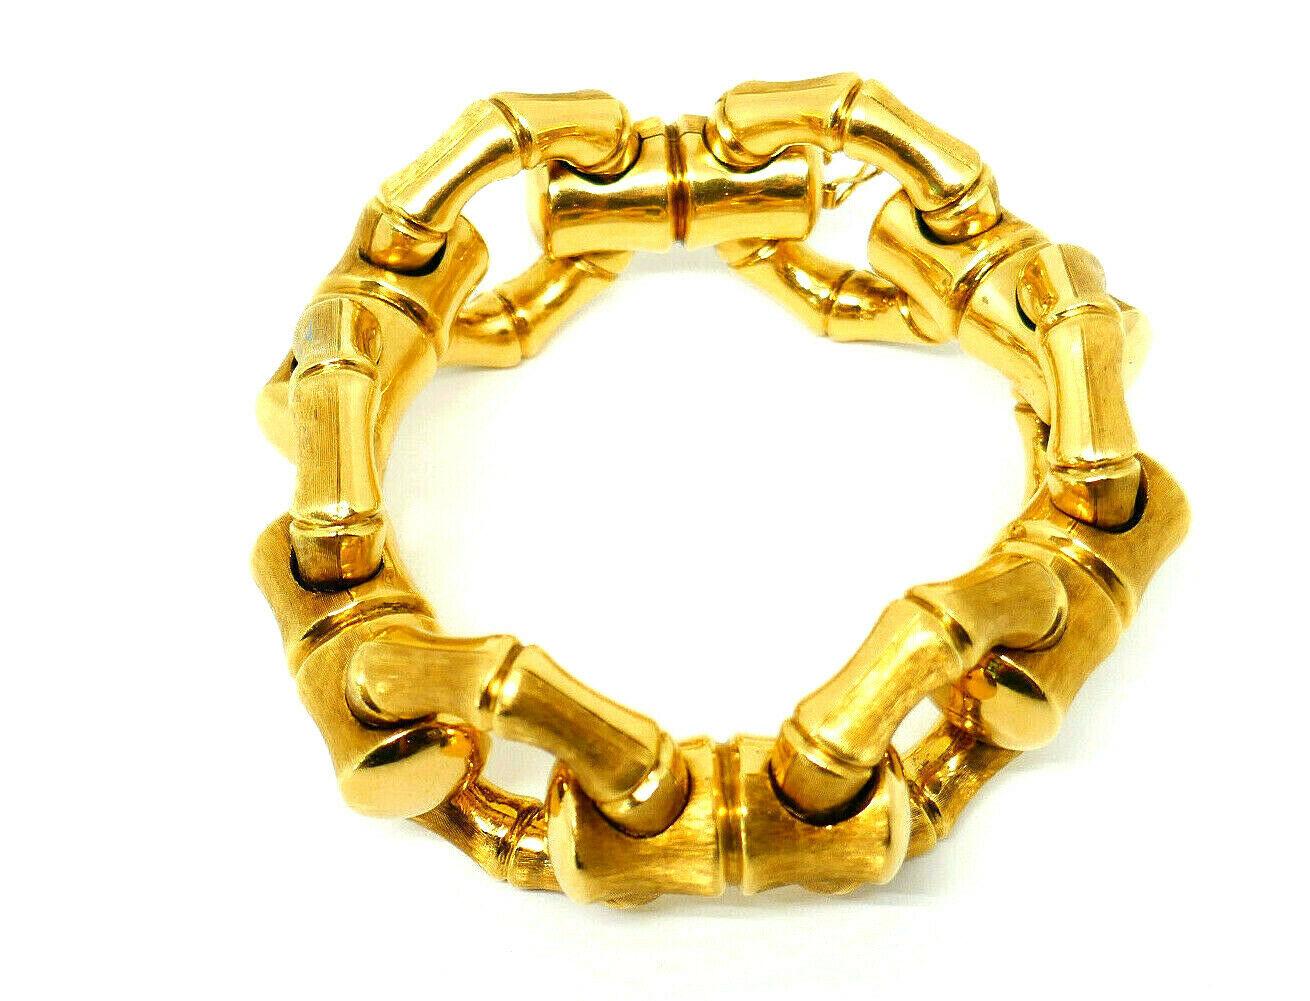 Oversized bamboo link makes this bracelet look outstanding. 
It's a chunky bold piece you will be wearing every day as it's a reversible item that can be worn both sides. For a casual wearing put it on with a brushed gold surface up. Reverse it to a